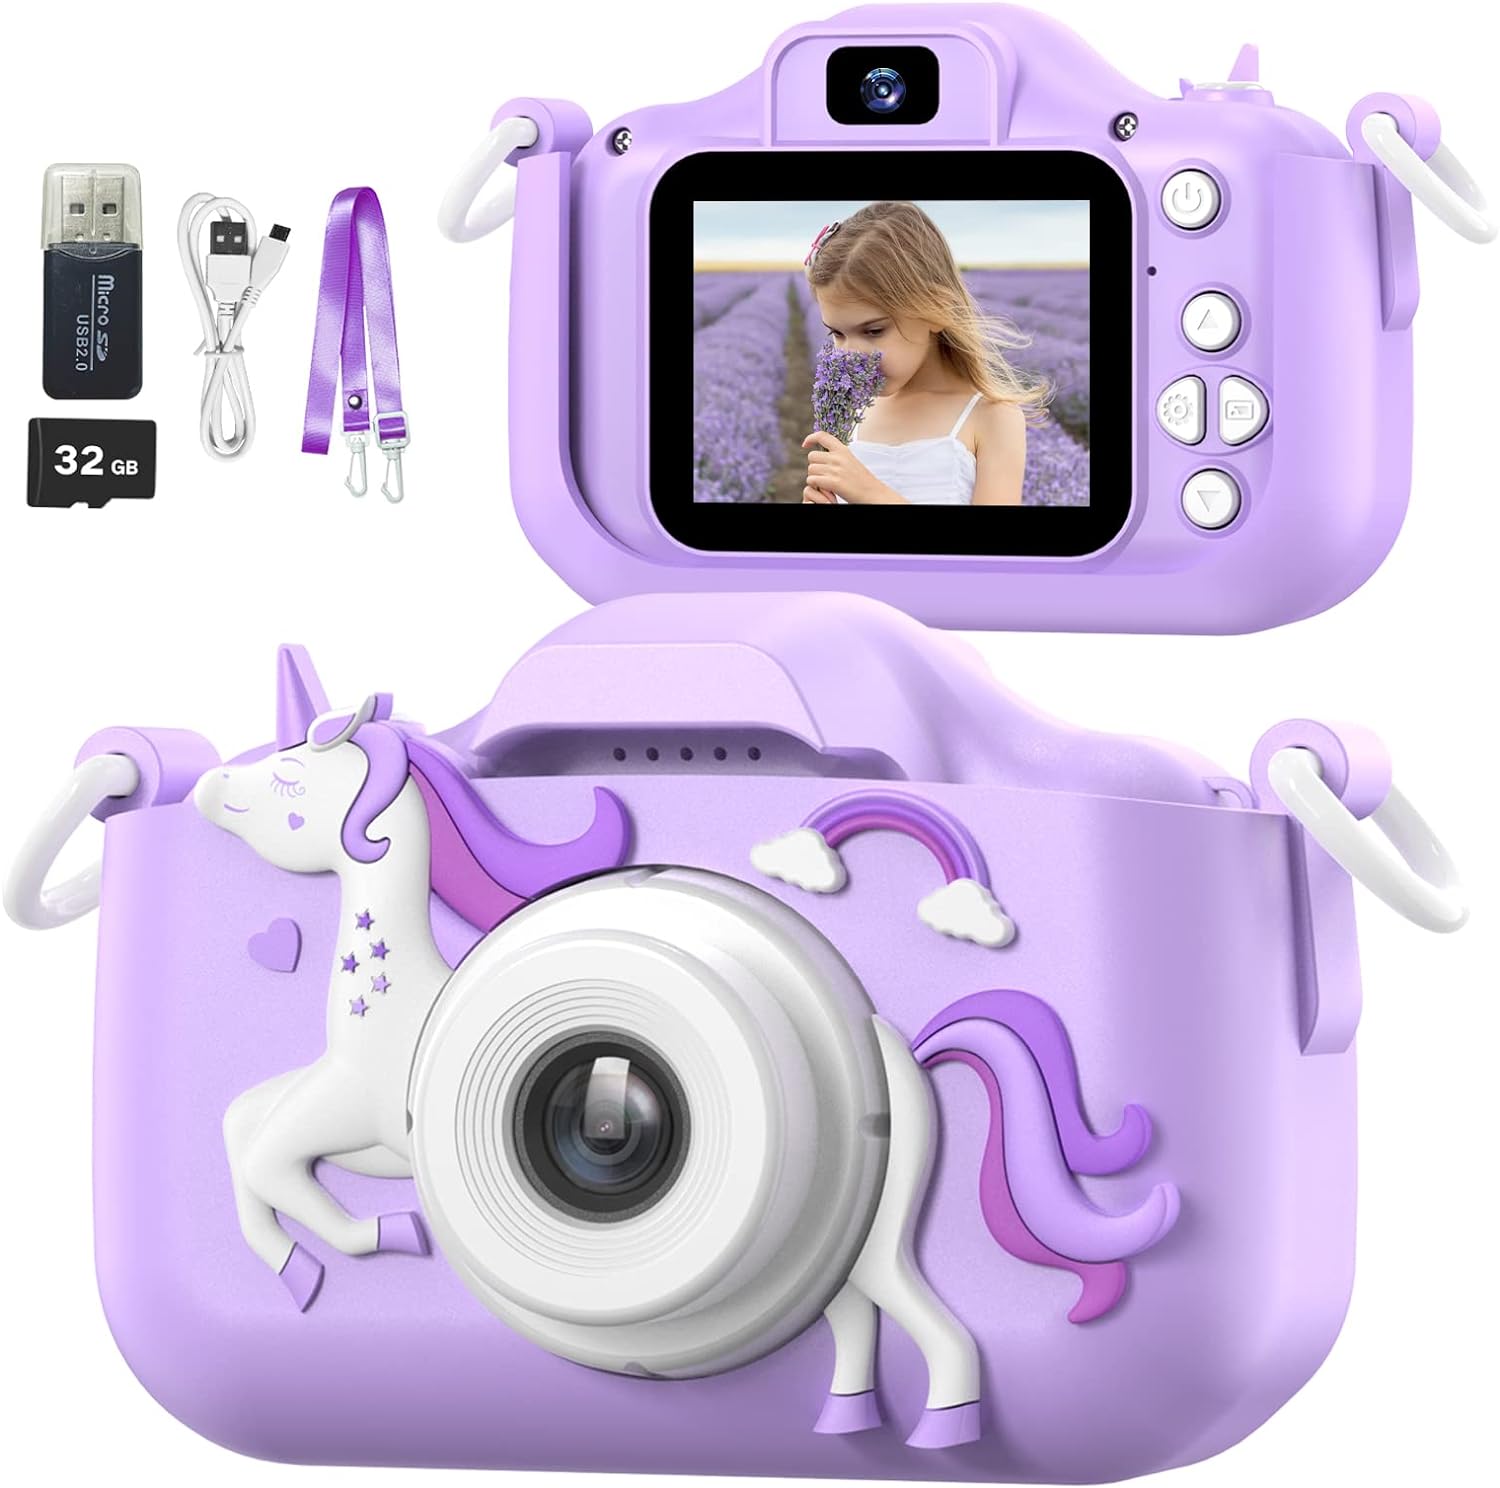 Mgaolo Childrens Camera Toys for 3-12 Years Old Kids Boys Girls,HD Digital Video Camera with Protective Silicone Cover,Christmas Birthday Gifts with 32GB SD Card (Unicorn Purple) : Toys  Games